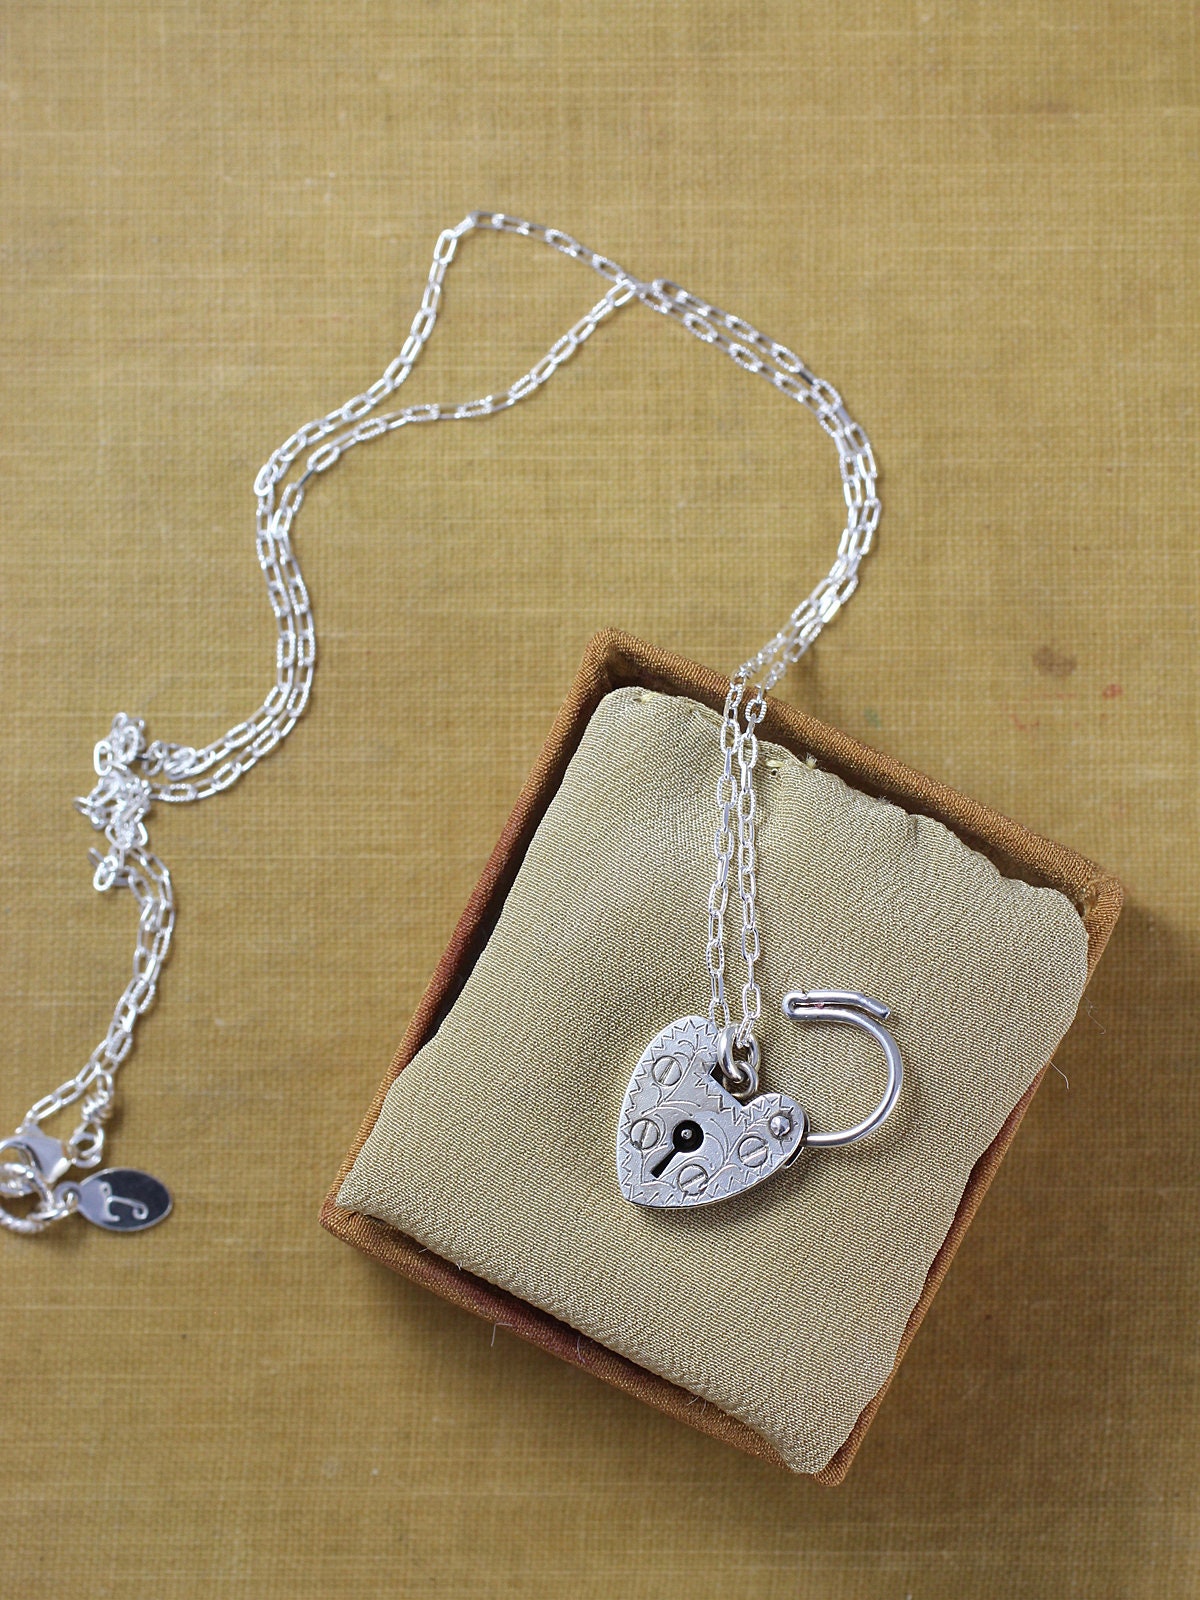 Small Sterling Silver Heart Padlock Charm Necklace, Vintage Key Hole